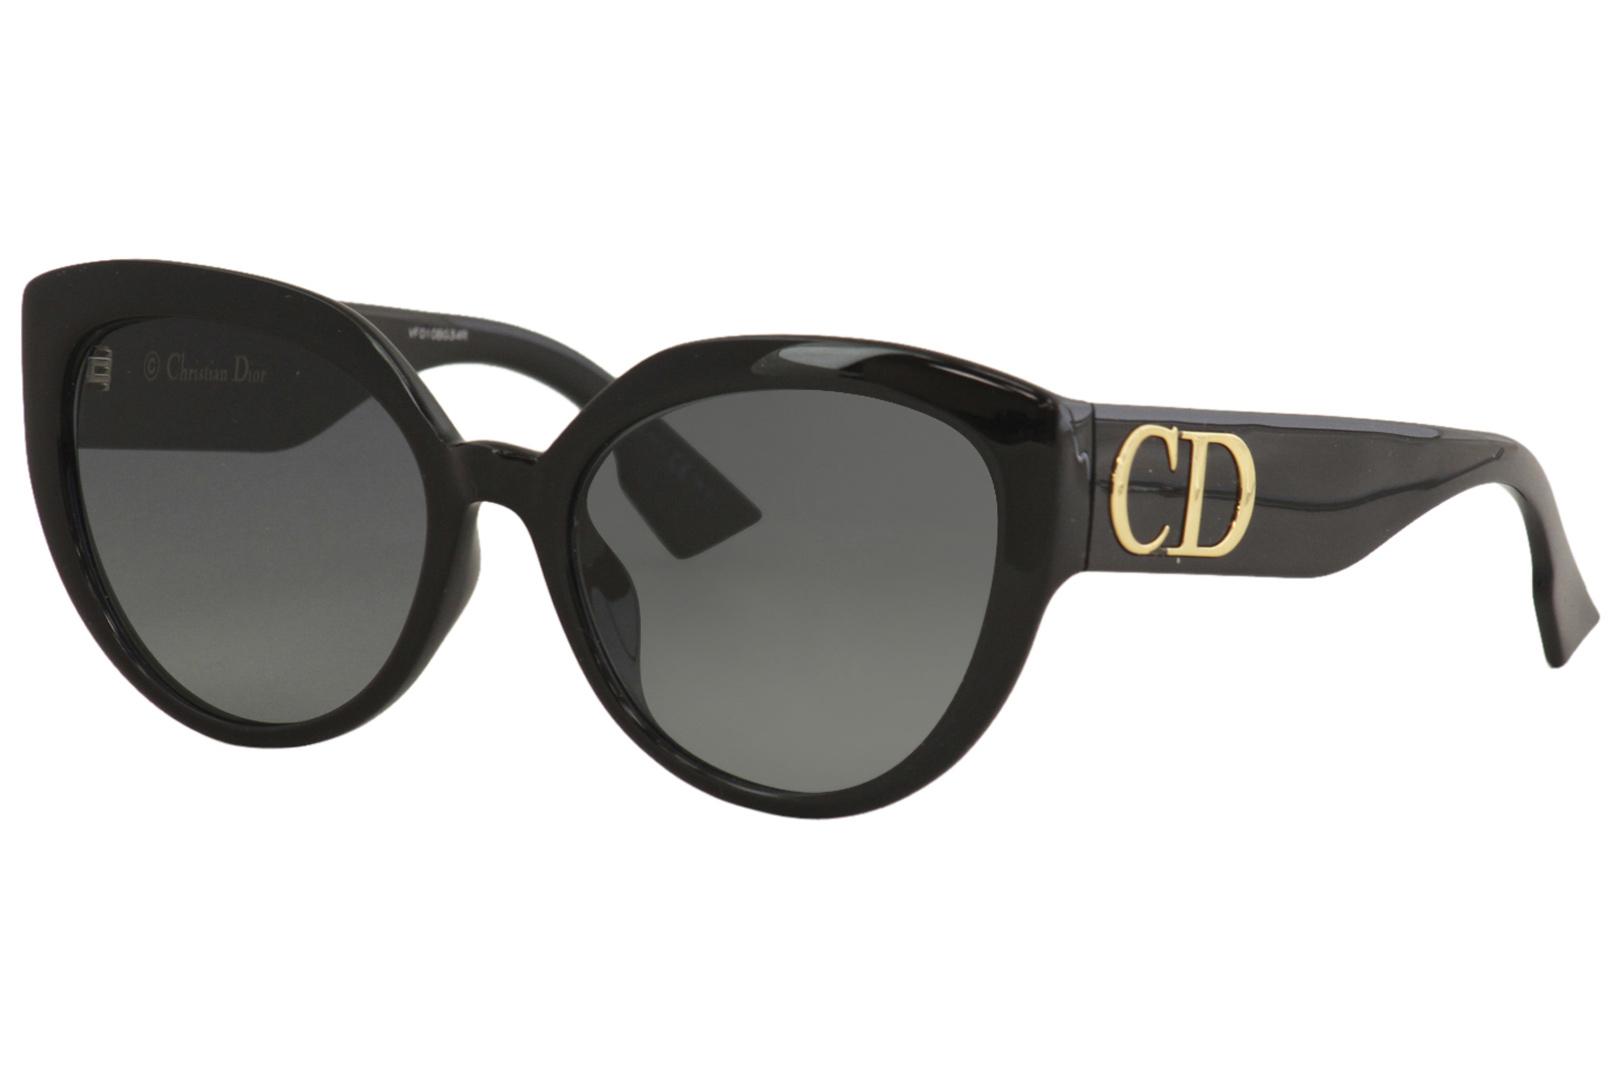 Dior Catstyle1 53mm Cat Eye Sunglasses In Green  ModeSens  Cat eye  sunglasses Christian dior sunglasses Black cat eye sunglasses